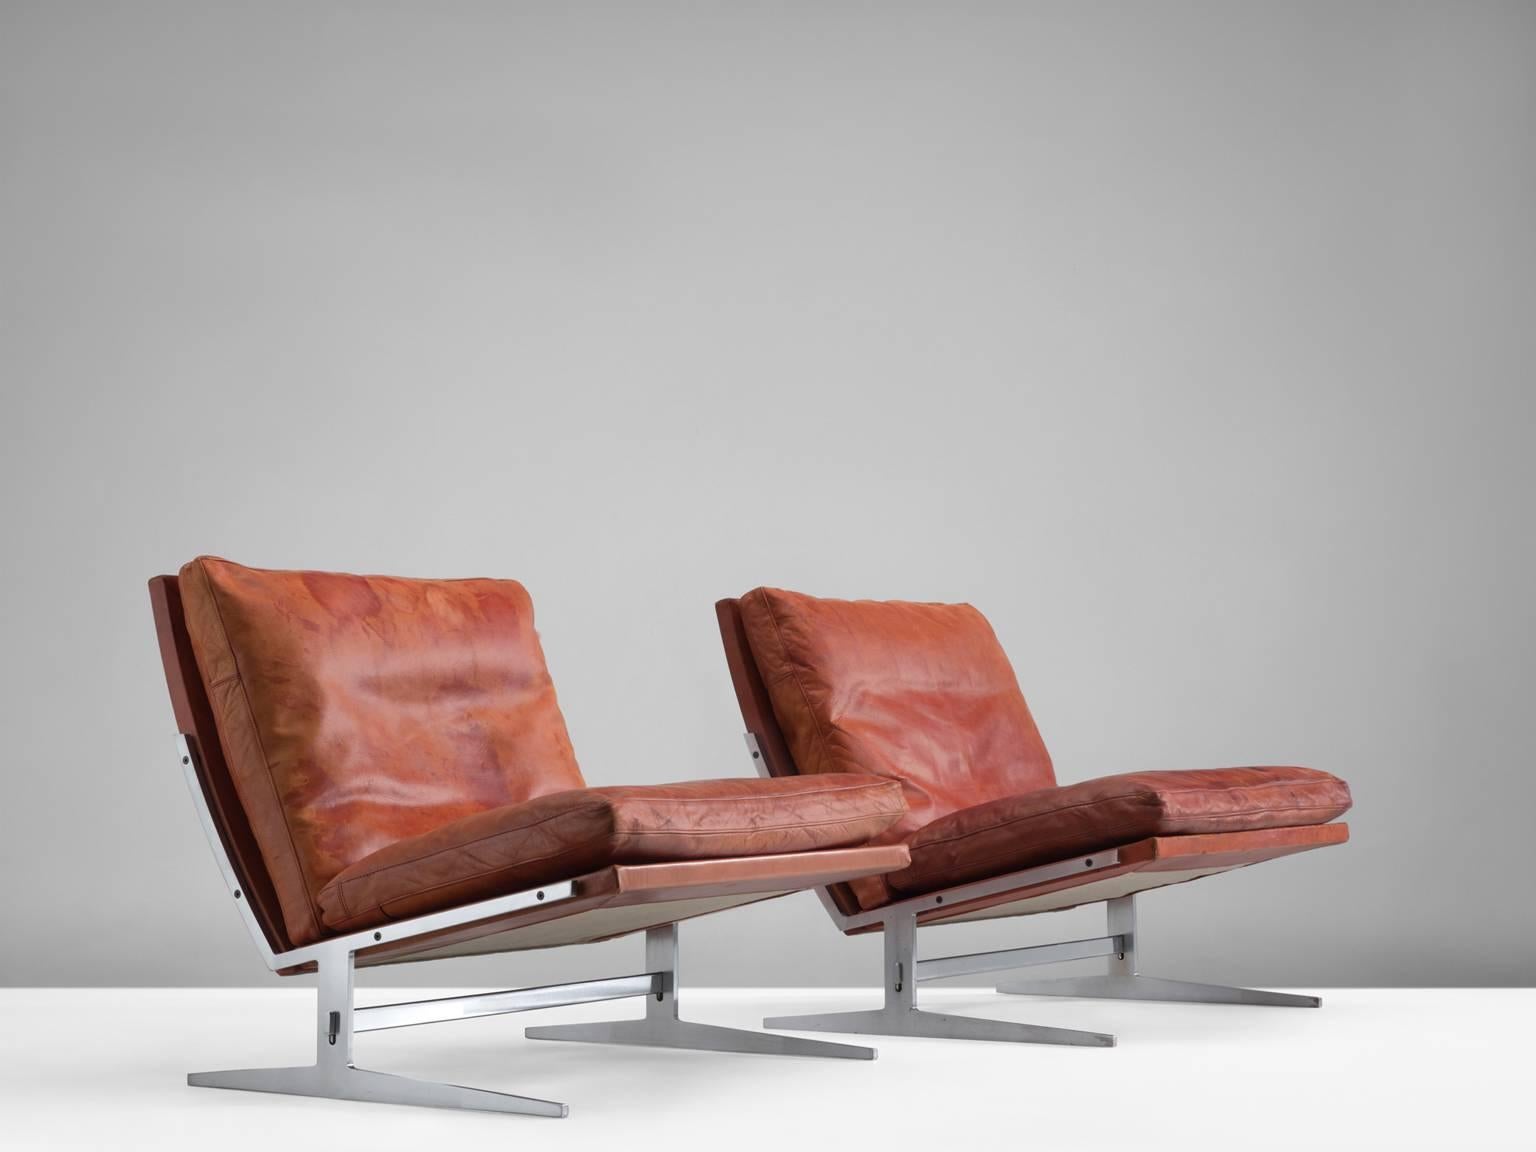 Set of chairs by Preben Fabricius and Jørgen Kastholm, steel and leather, Denmark, 1962.

Set of two modern slipper chairs in steel and leather. These chairs hold an L-shaped seating. This shape is repeated in the legs. A double L is mirrored to